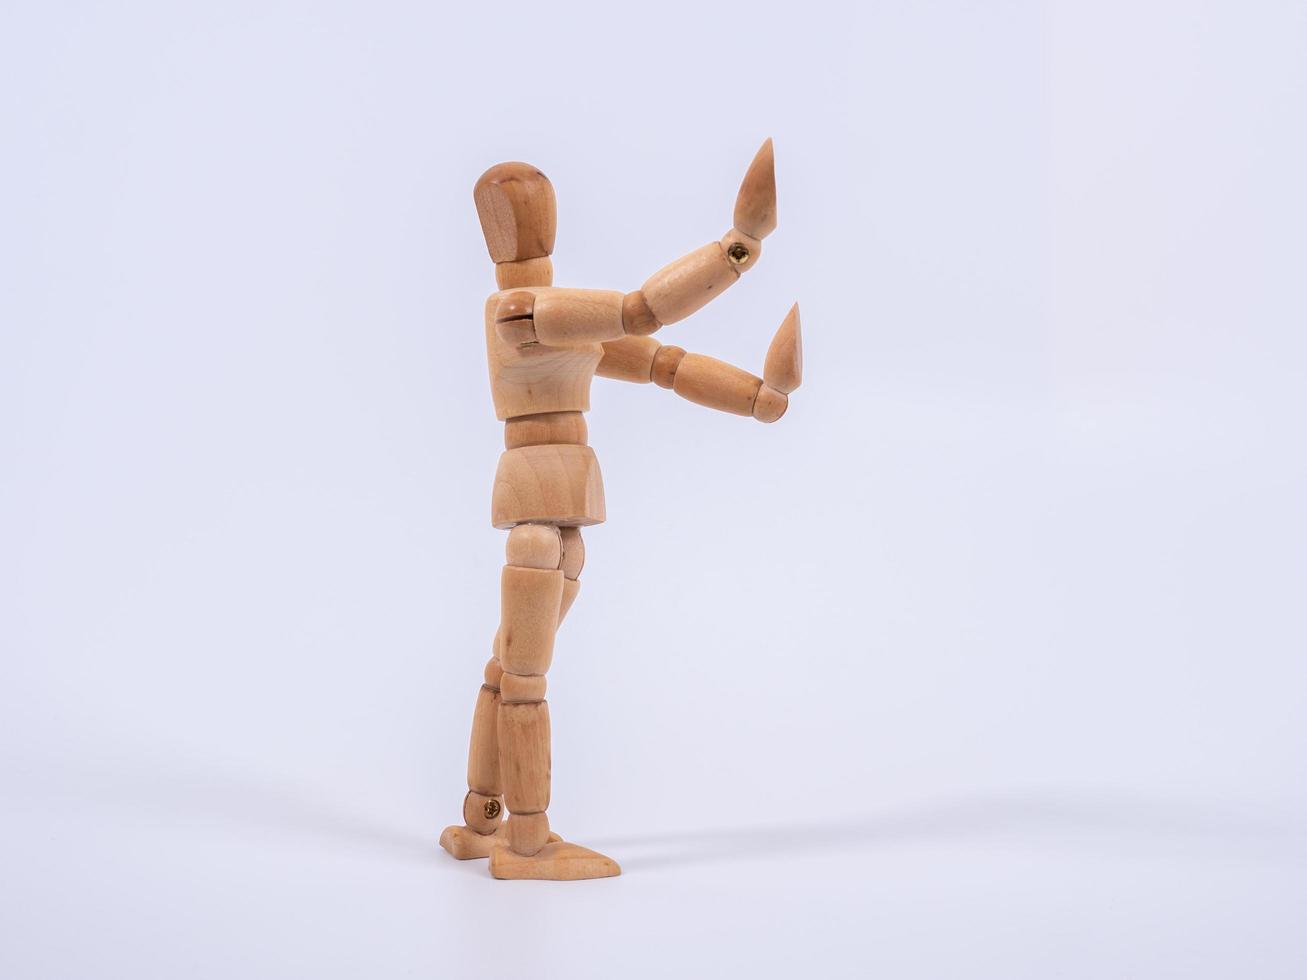 Wooden mannequin push anything , Wooden figure action photo